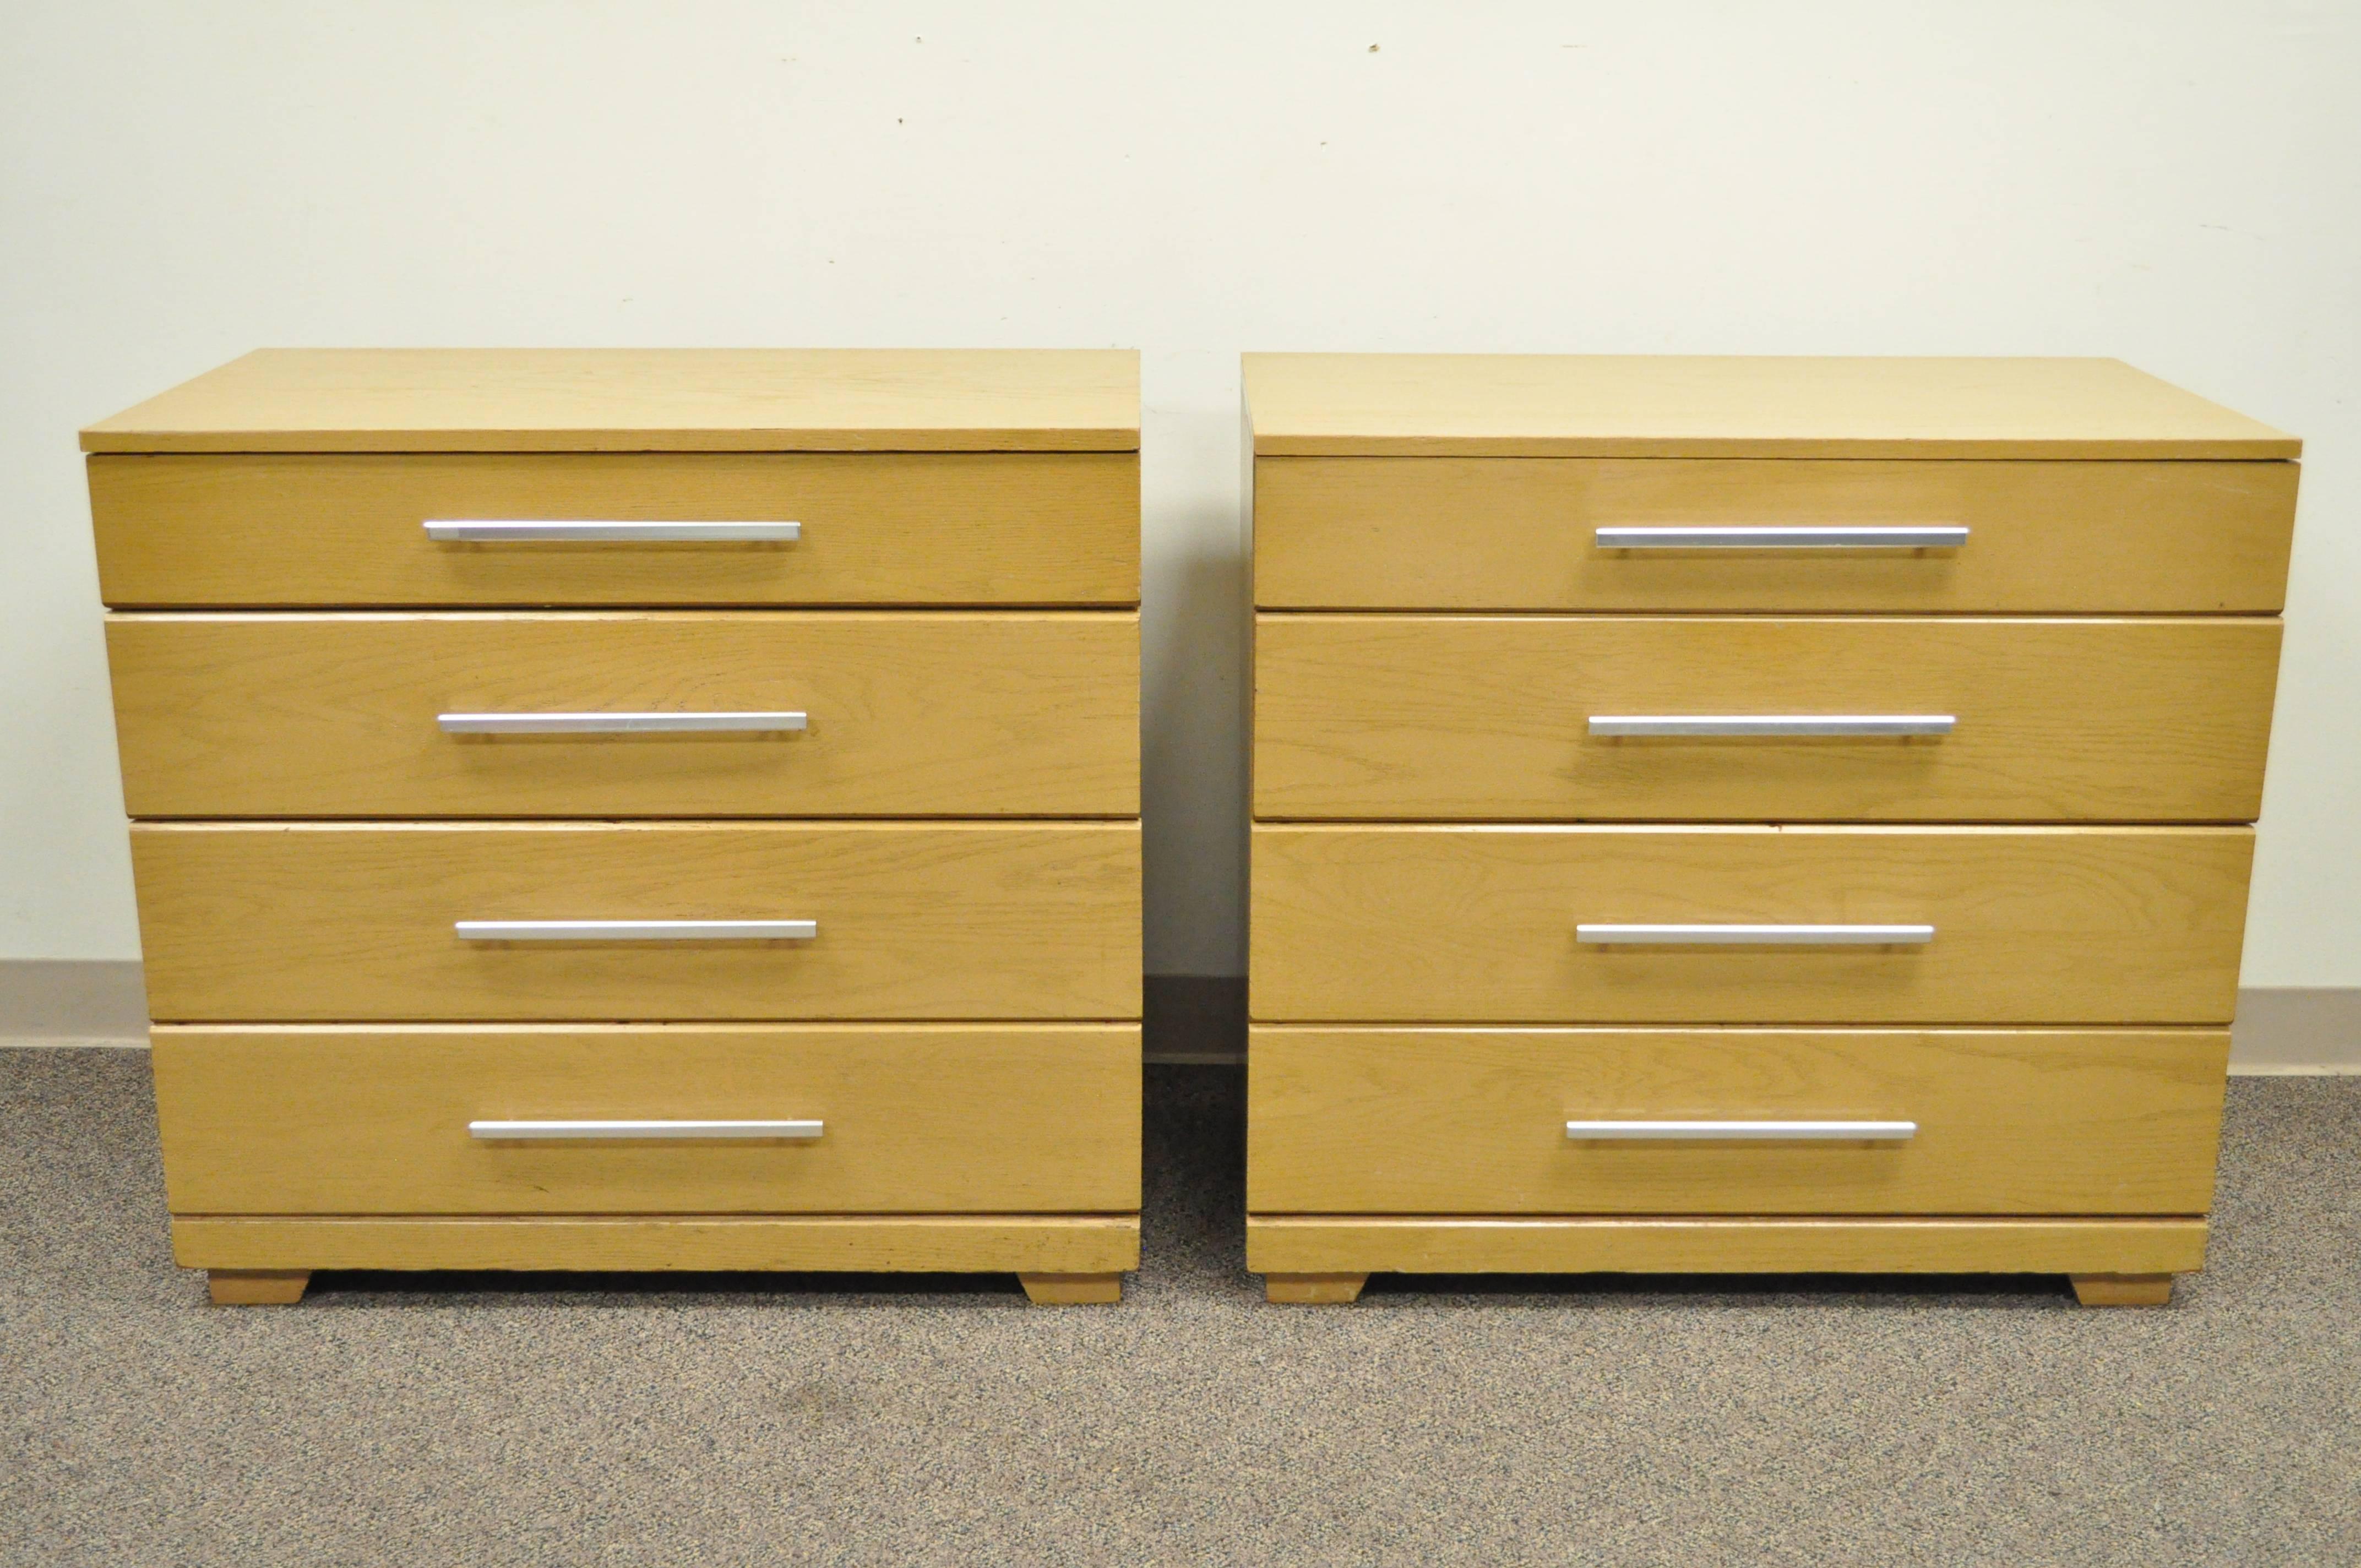 Pair of oak Mid-Century Modern bachelor chests designed by Raymond Loewy for Mengel. Each chest features clean modernist lines, four drawers, aluminum hardware, original oak finish, raised on straight legs. Very hard to find a matching pair.